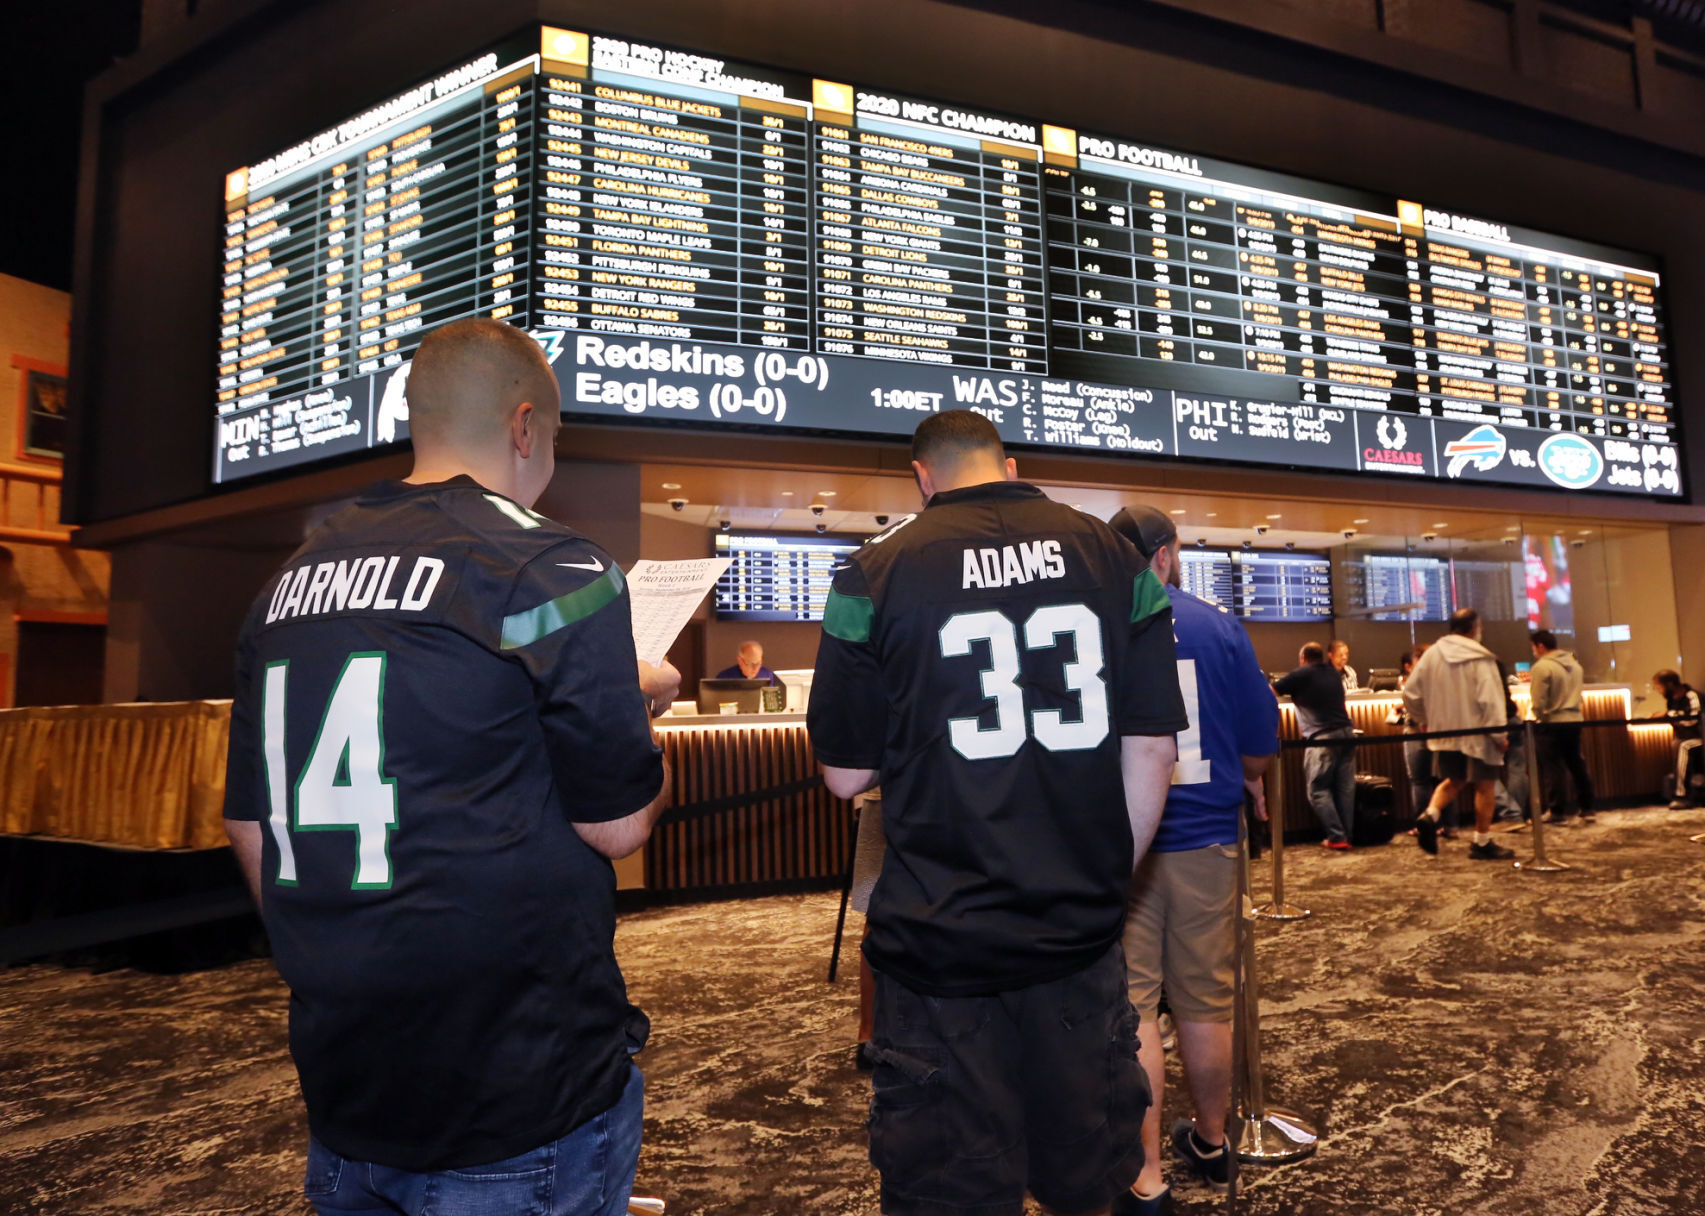 This year marks the first Olympics for legalized sports betting across the United States image